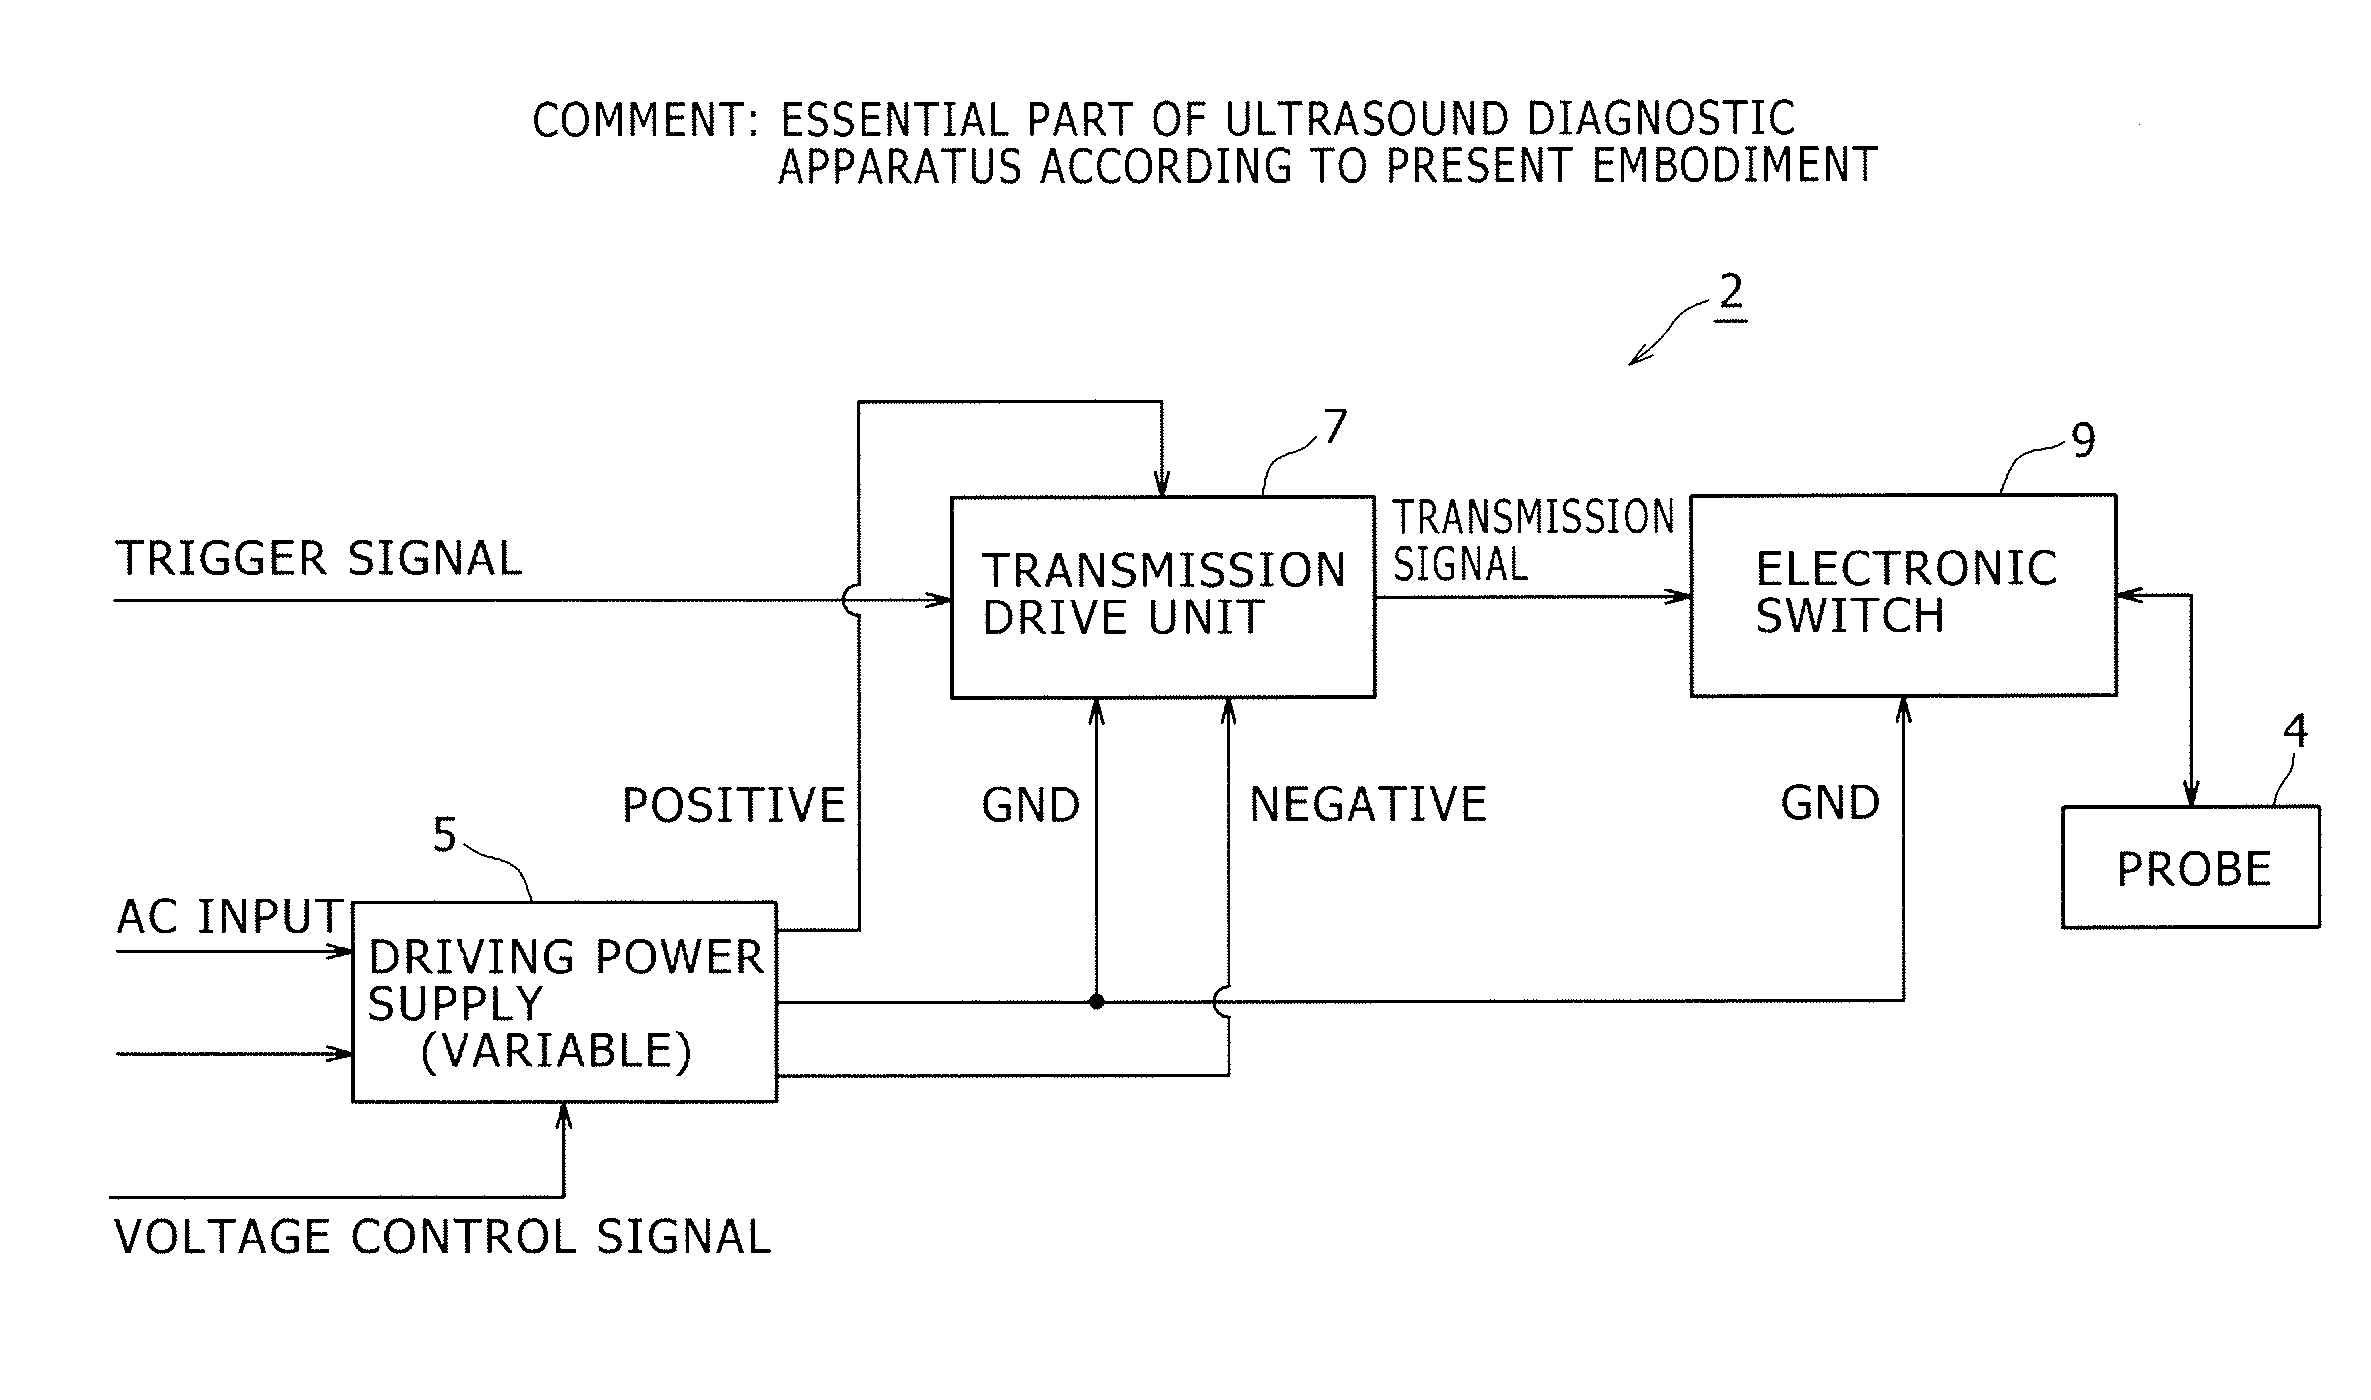 Semiconductor switch circuit, signal processing apparatus, and ultrasound diagnostic apparatus